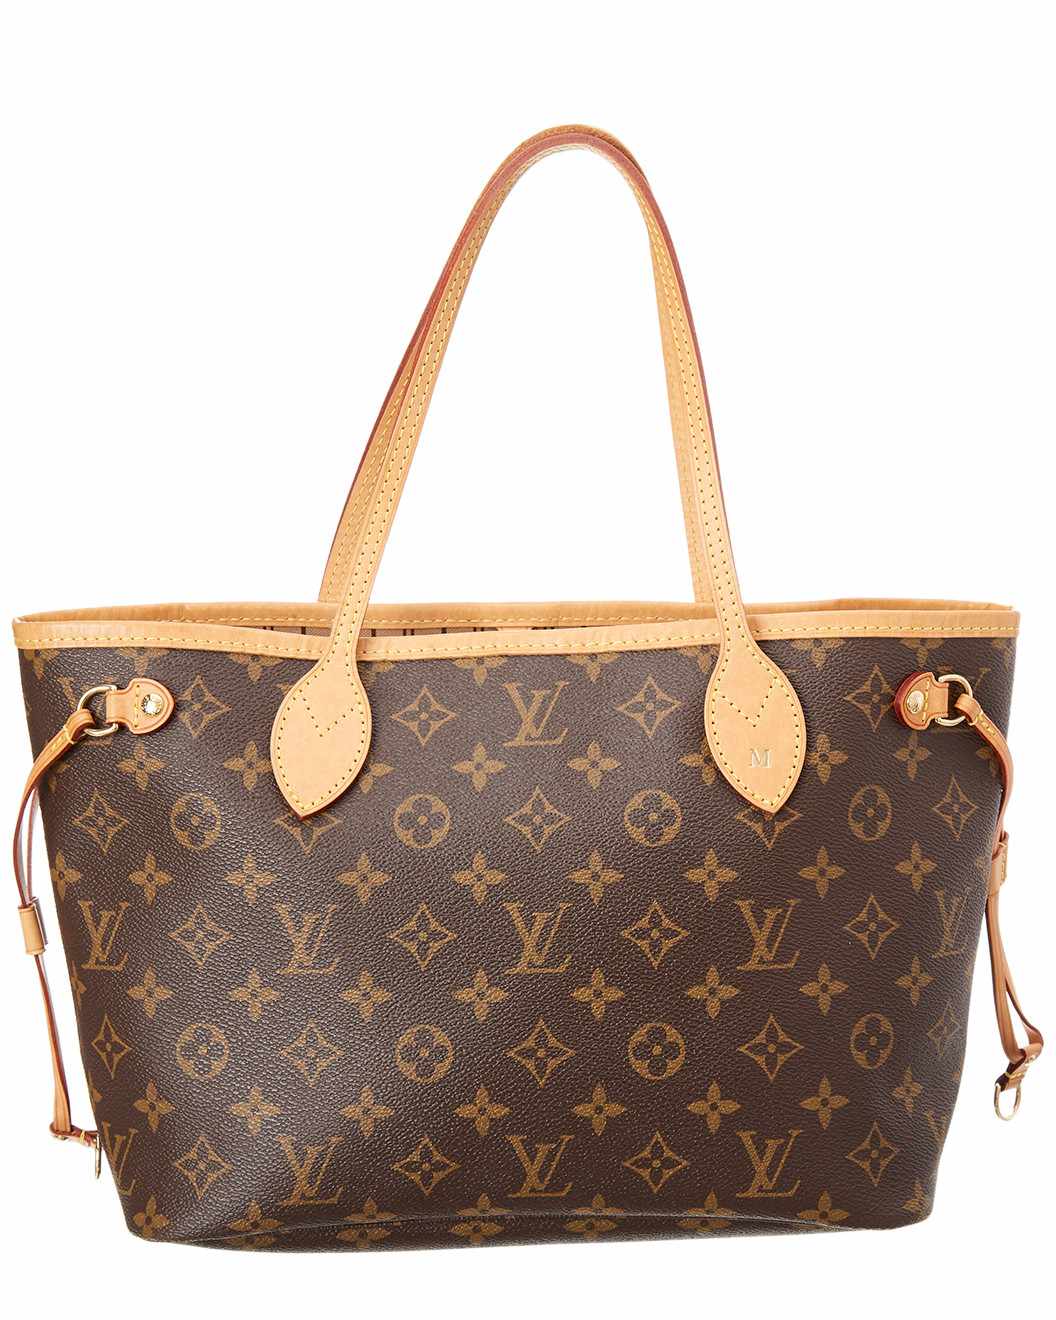 Louis Vuitton Sale - Embed